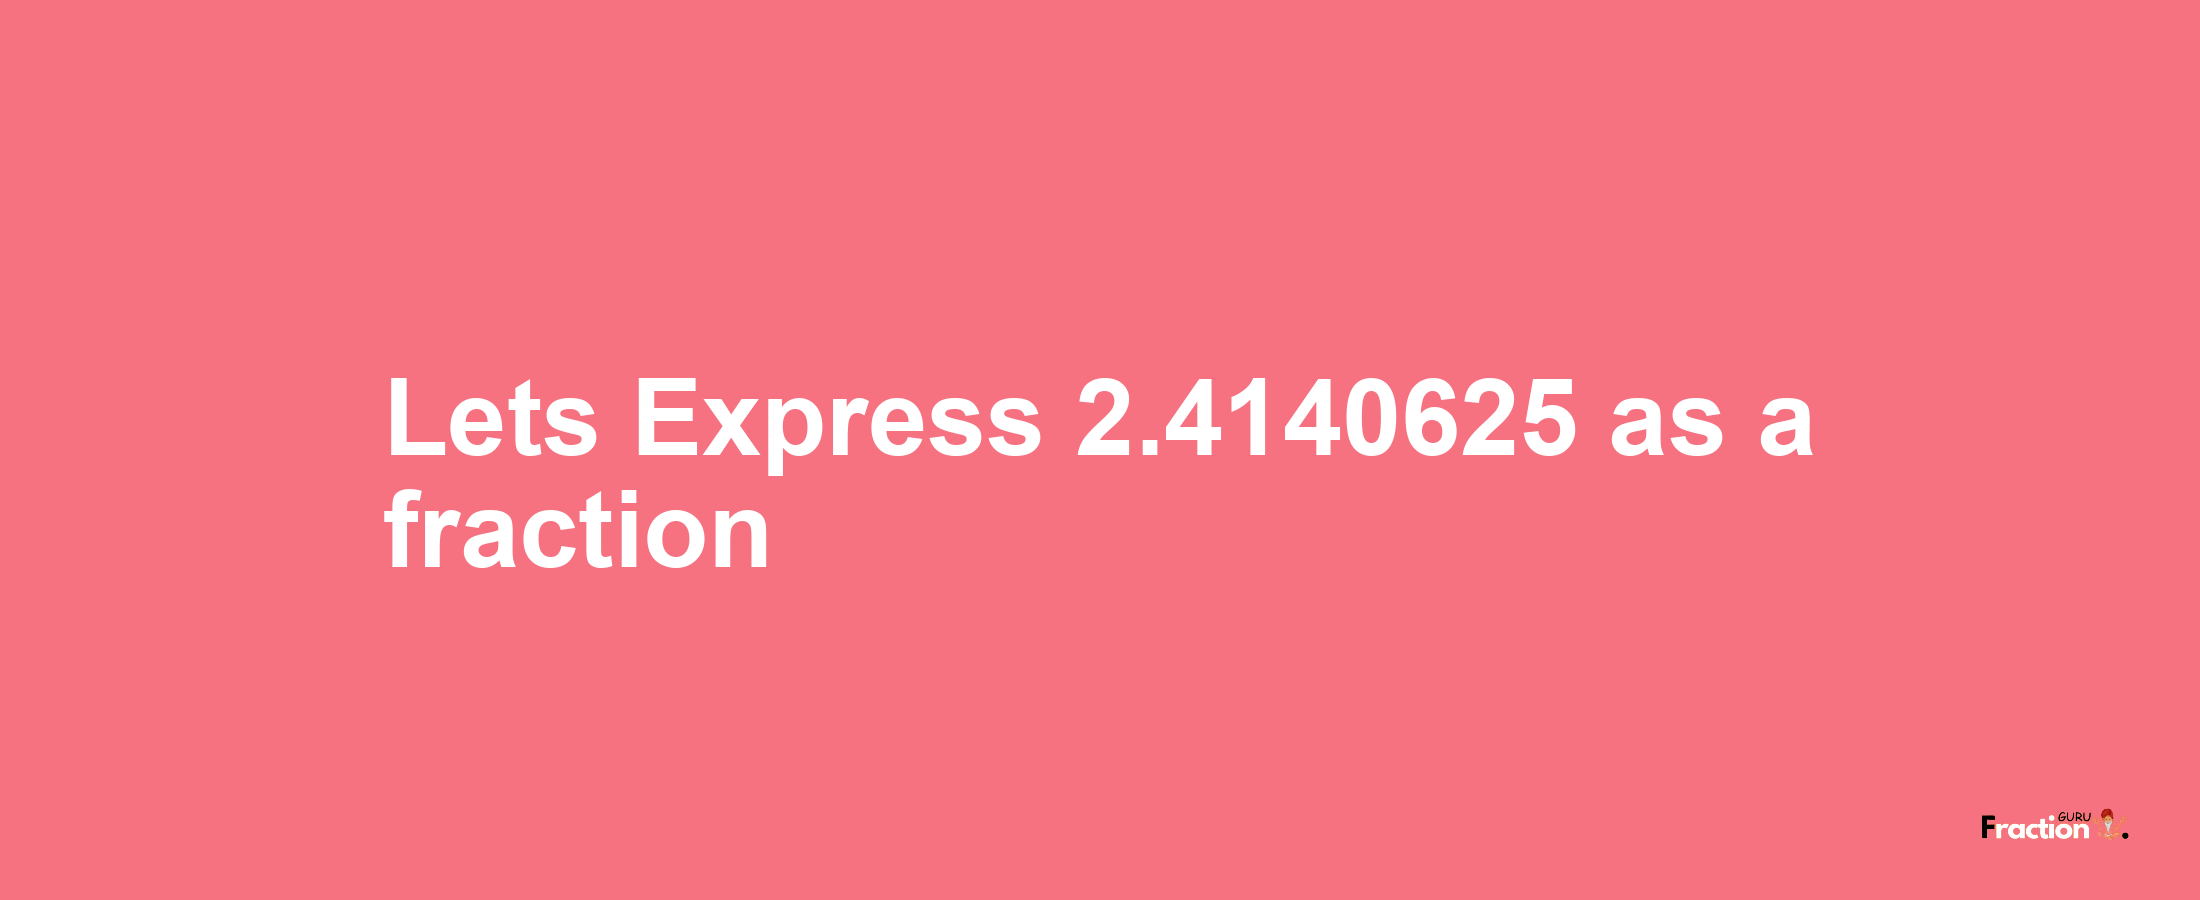 Lets Express 2.4140625 as afraction